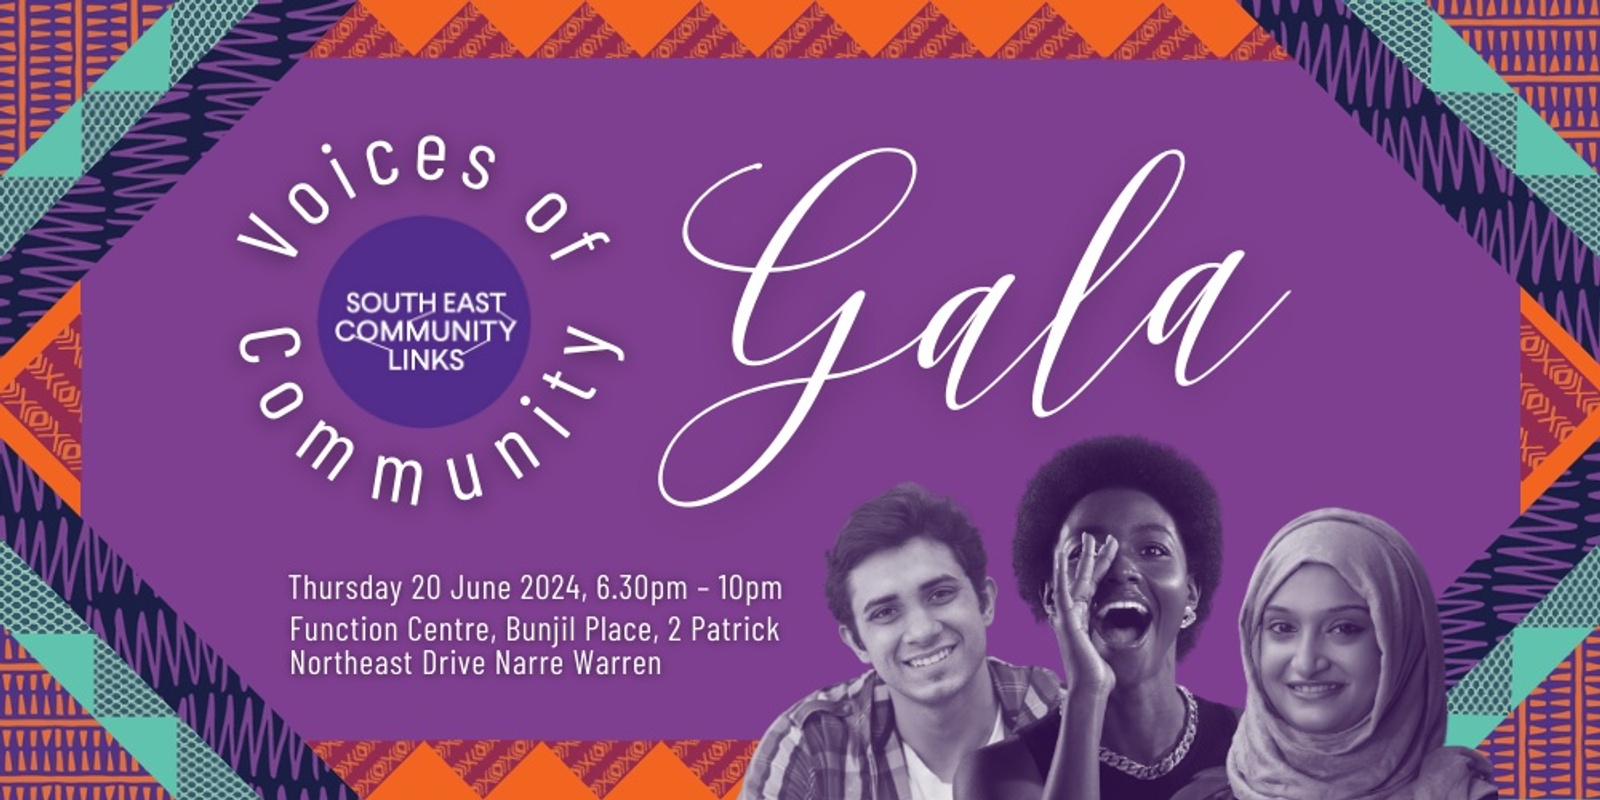 Banner image for Voices of Community Gala